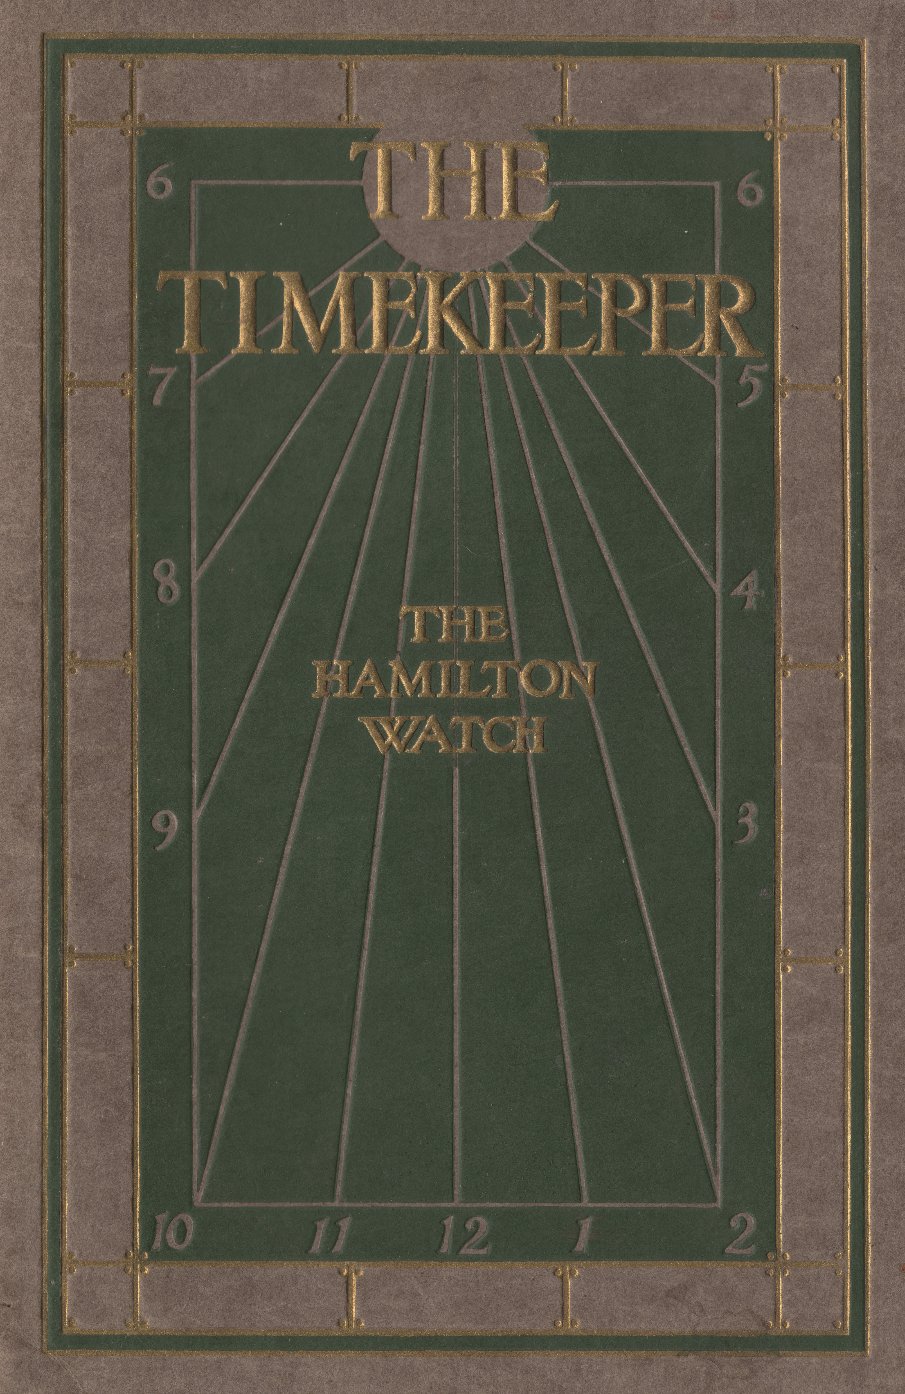 The Timekeeper: The Hamilton Watch (1911 Catalog) Cover Image